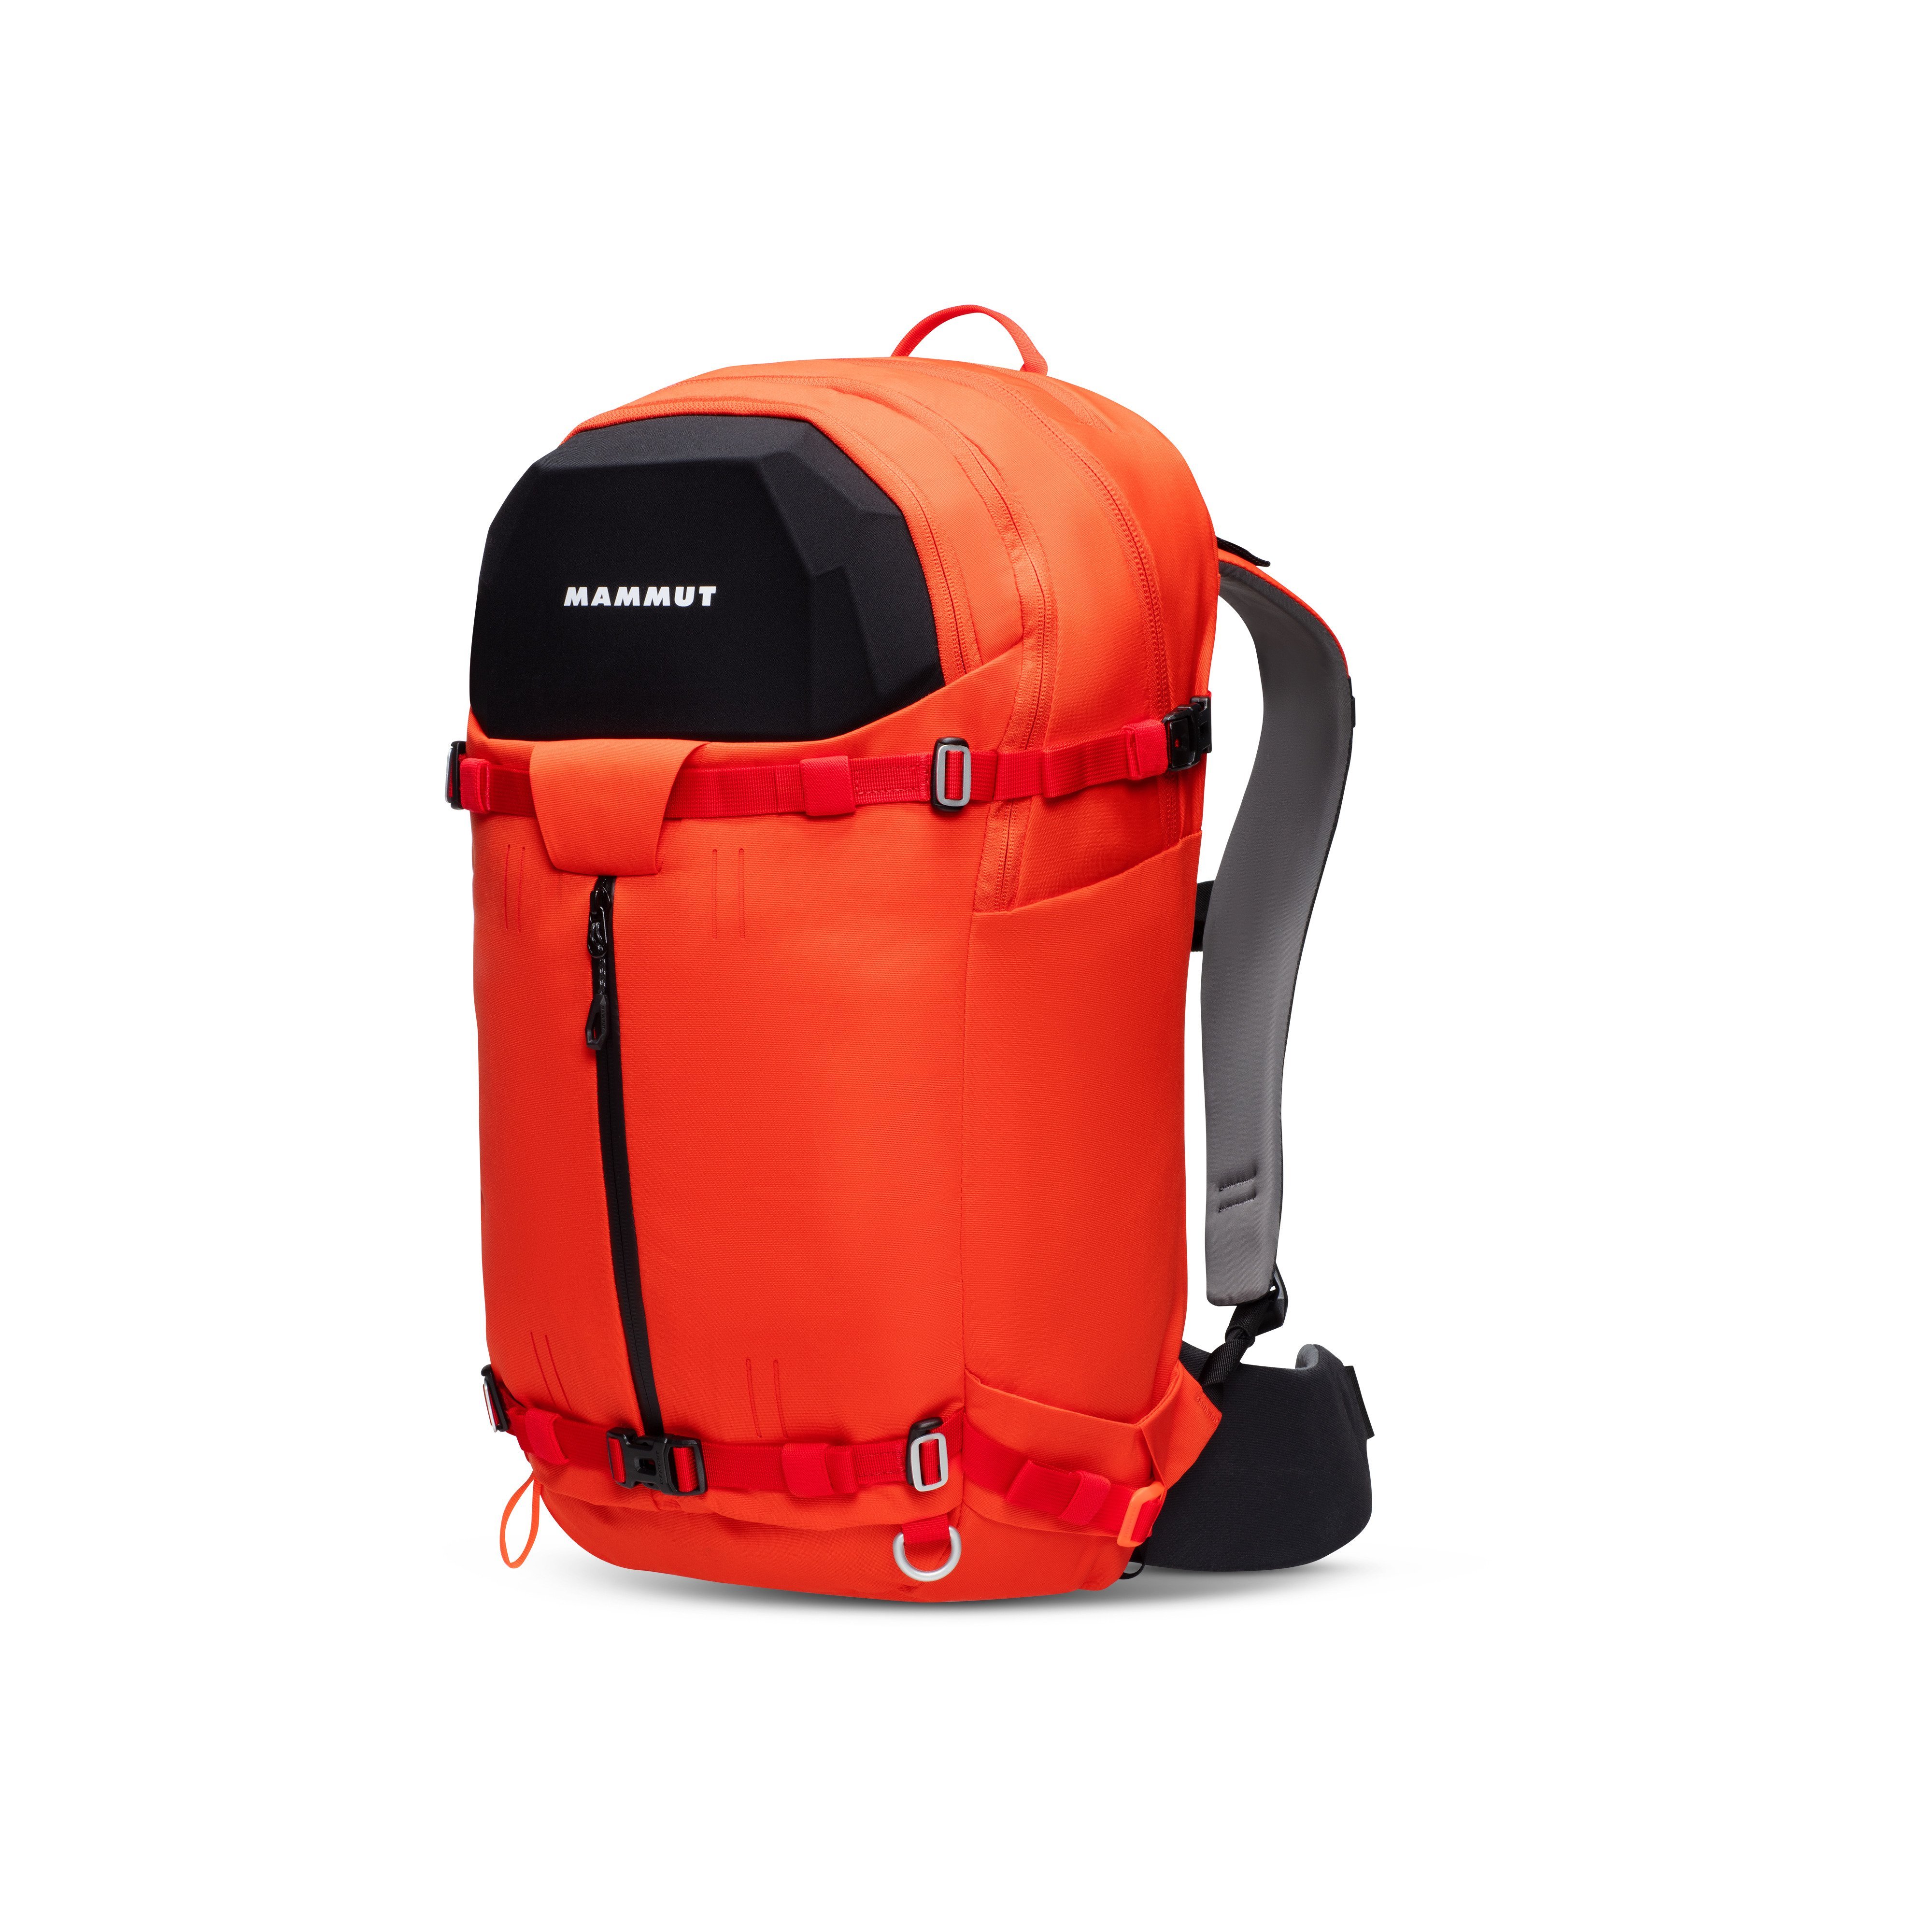 Nirvana 35 - hot red-black, 35 L product image